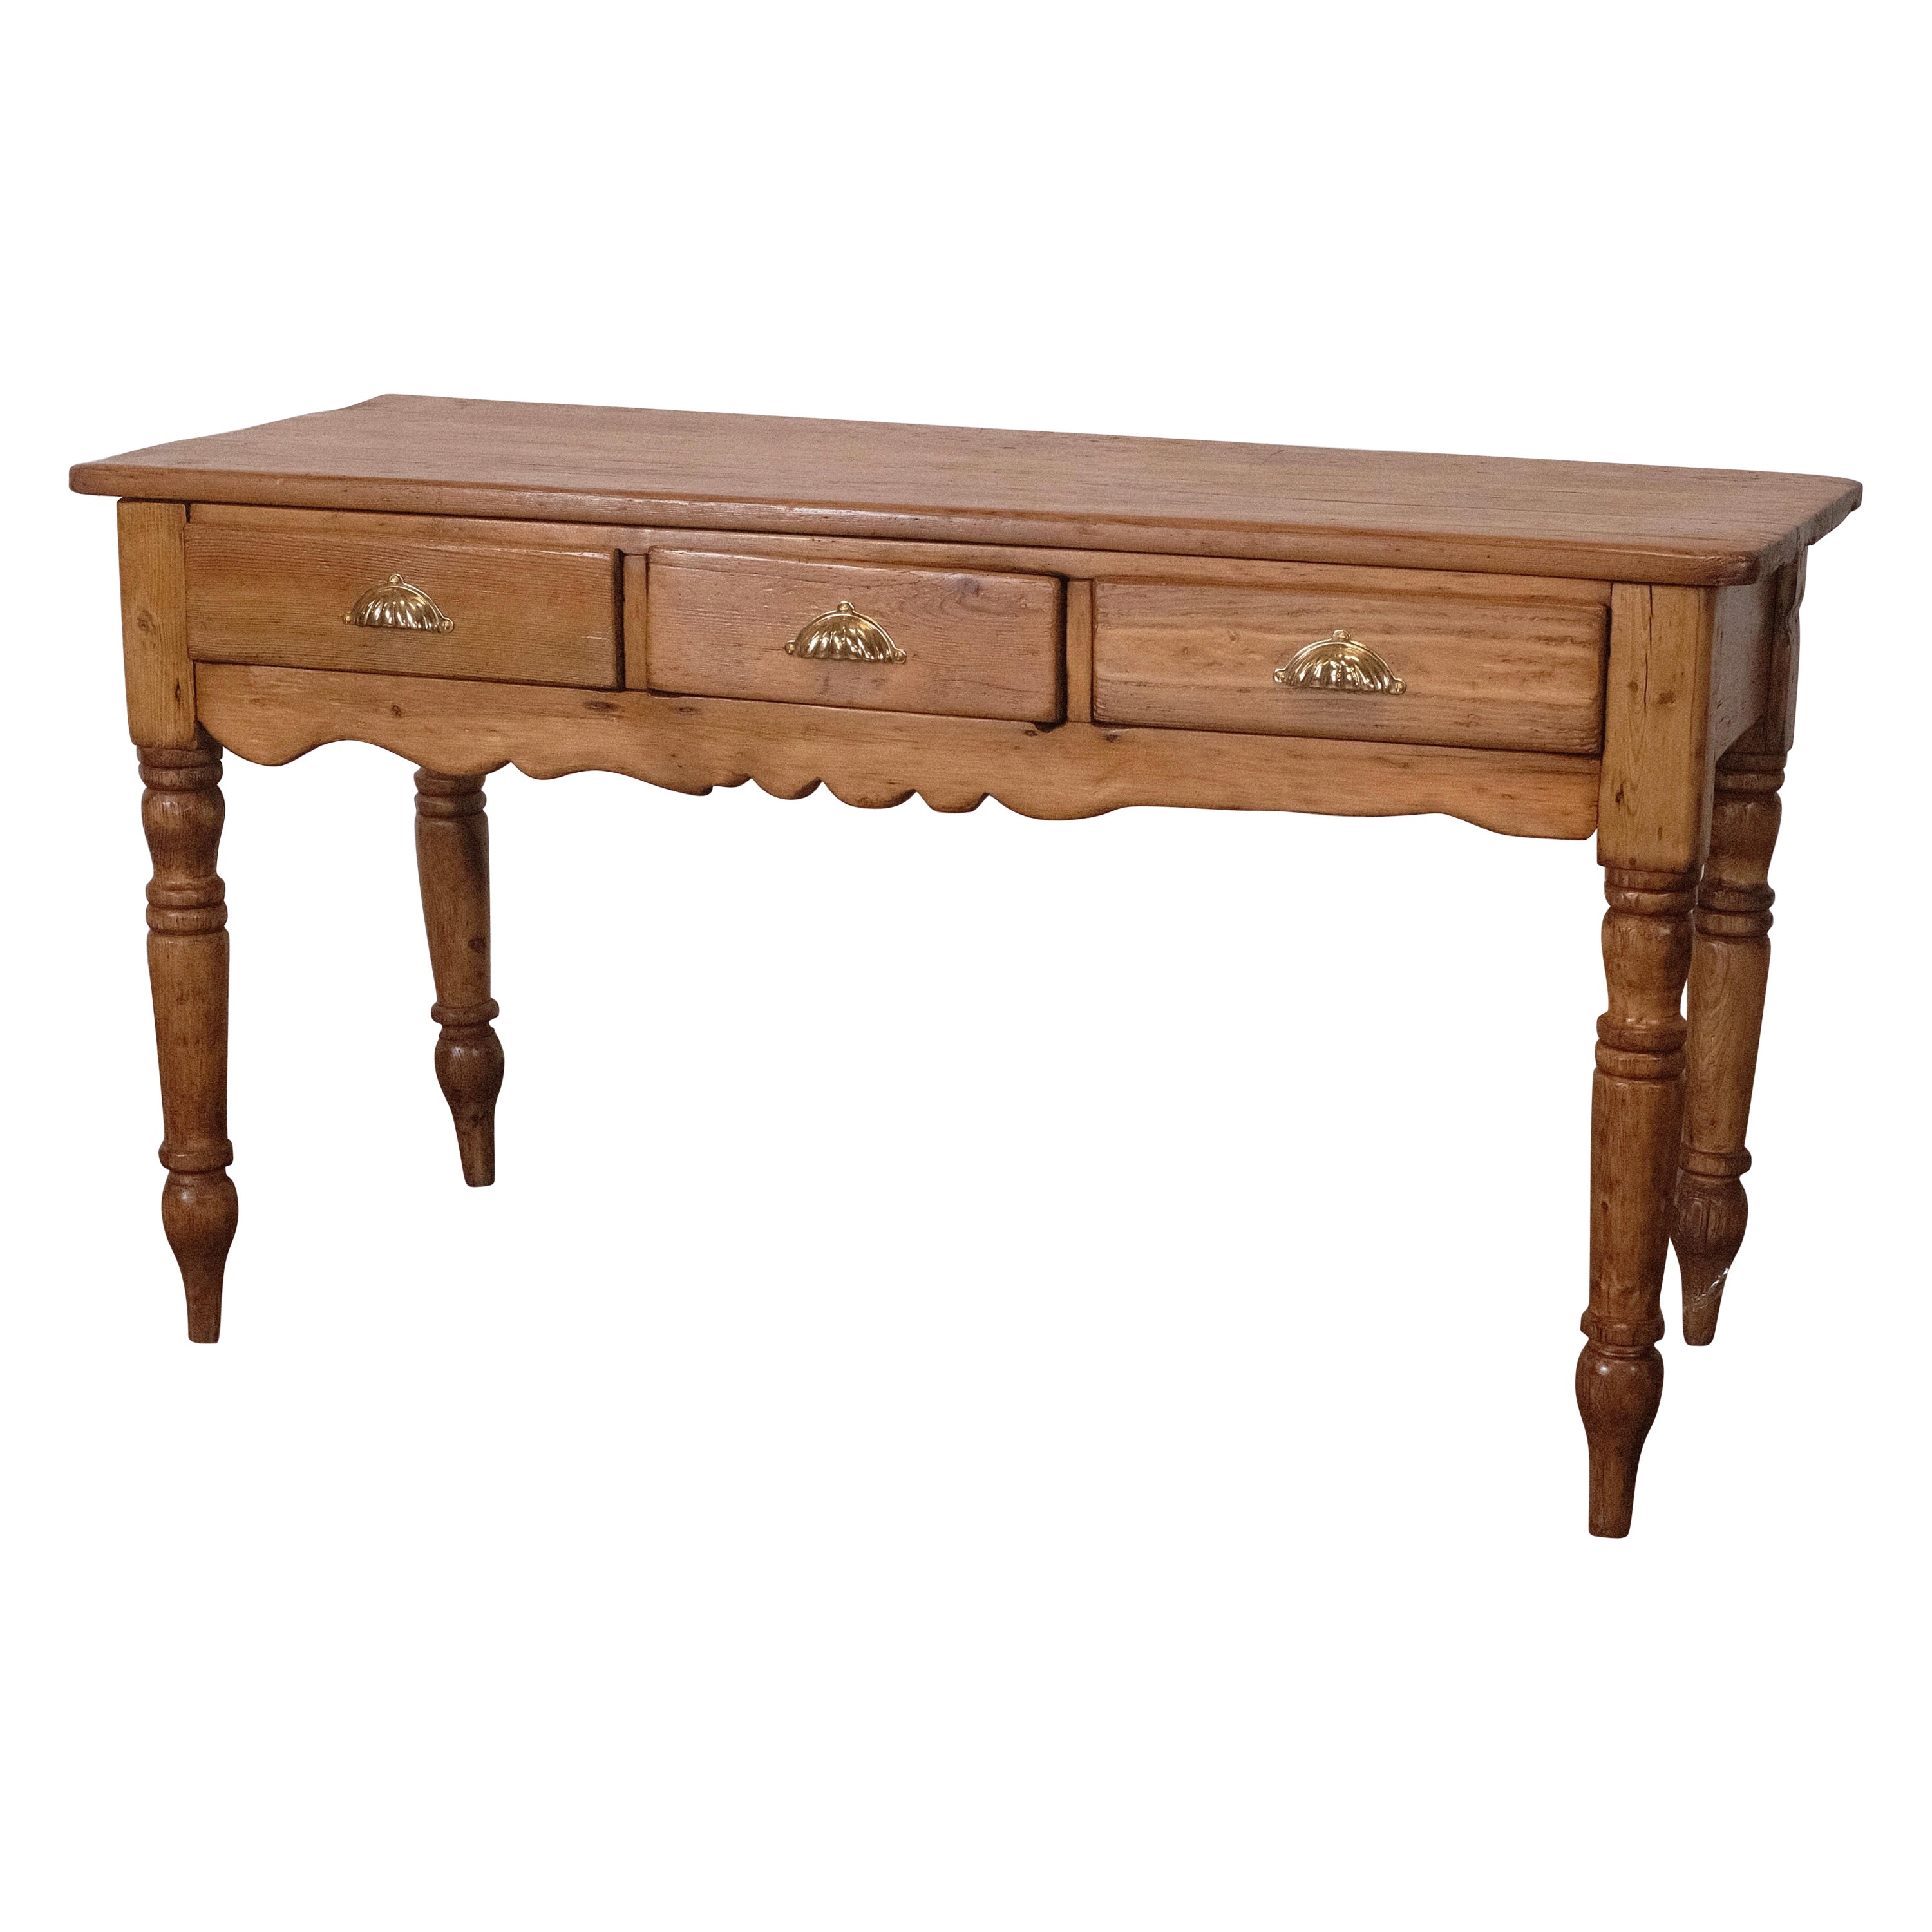 19th Century Country English Pine Farmhouse Work Table Console For Sale